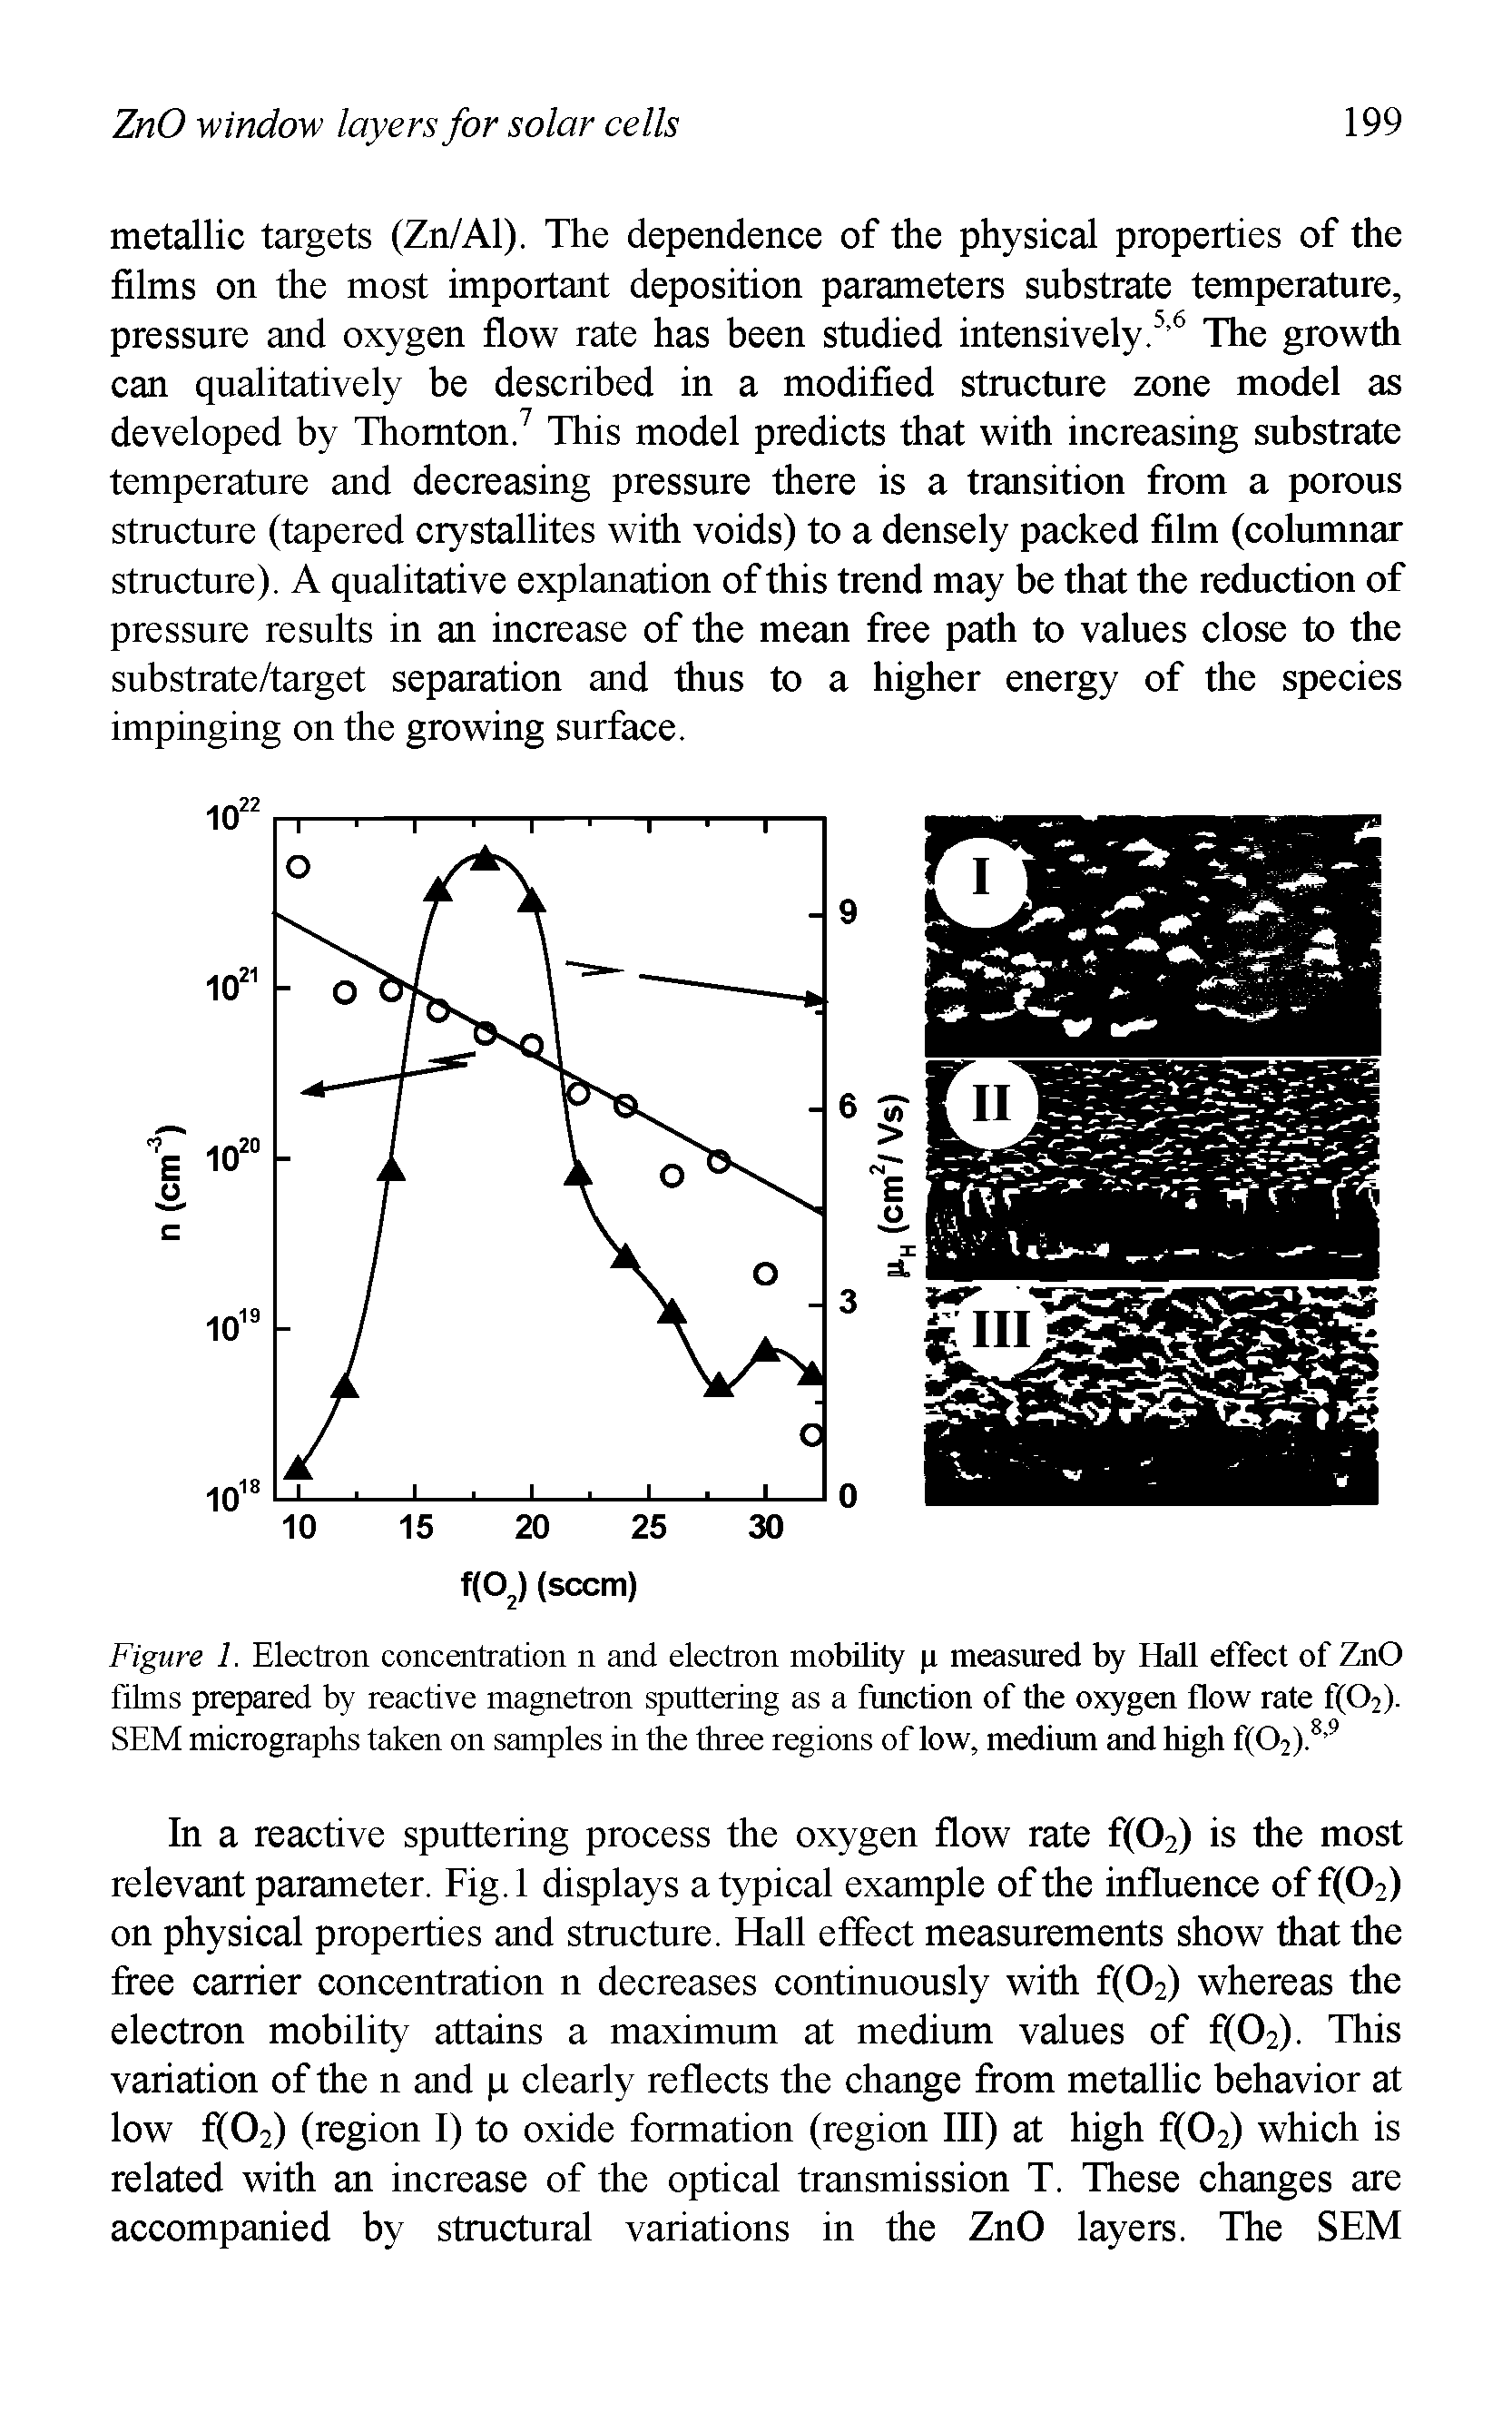 Figure 1. Electron concentration n and electron mobility i measured by Hall effect of ZnO films prepared by reactive magnetron sputtering as a fimction of the oxygen flow rate f(02). SEM micrographs taken on samples in the three regions of low, medium and high f(02). ...